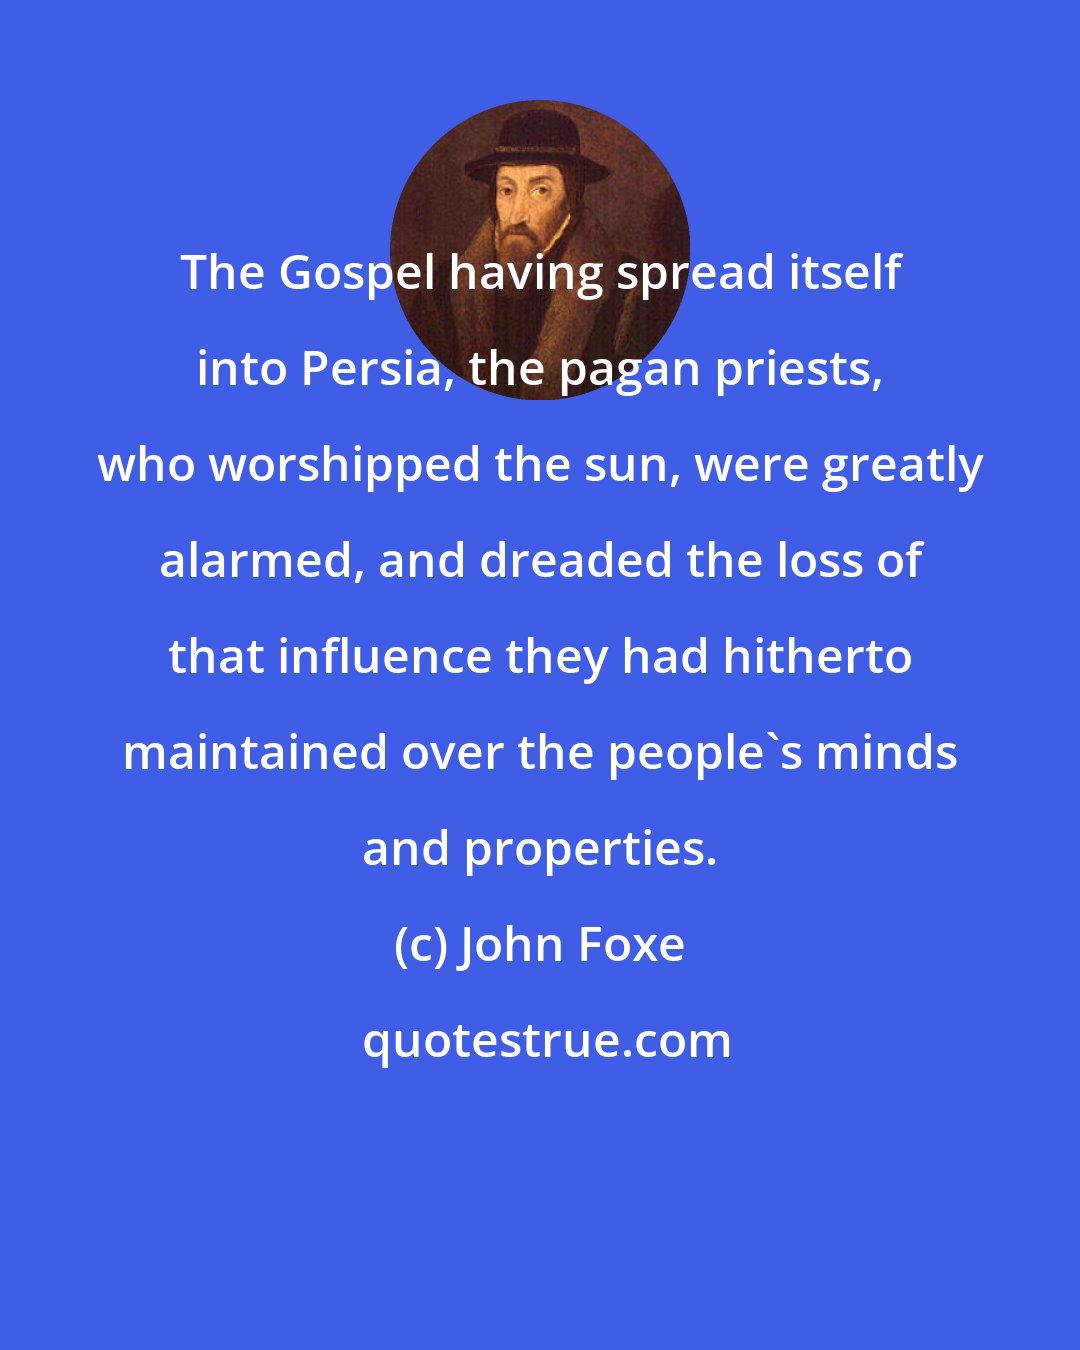 John Foxe: The Gospel having spread itself into Persia, the pagan priests, who worshipped the sun, were greatly alarmed, and dreaded the loss of that influence they had hitherto maintained over the people's minds and properties.